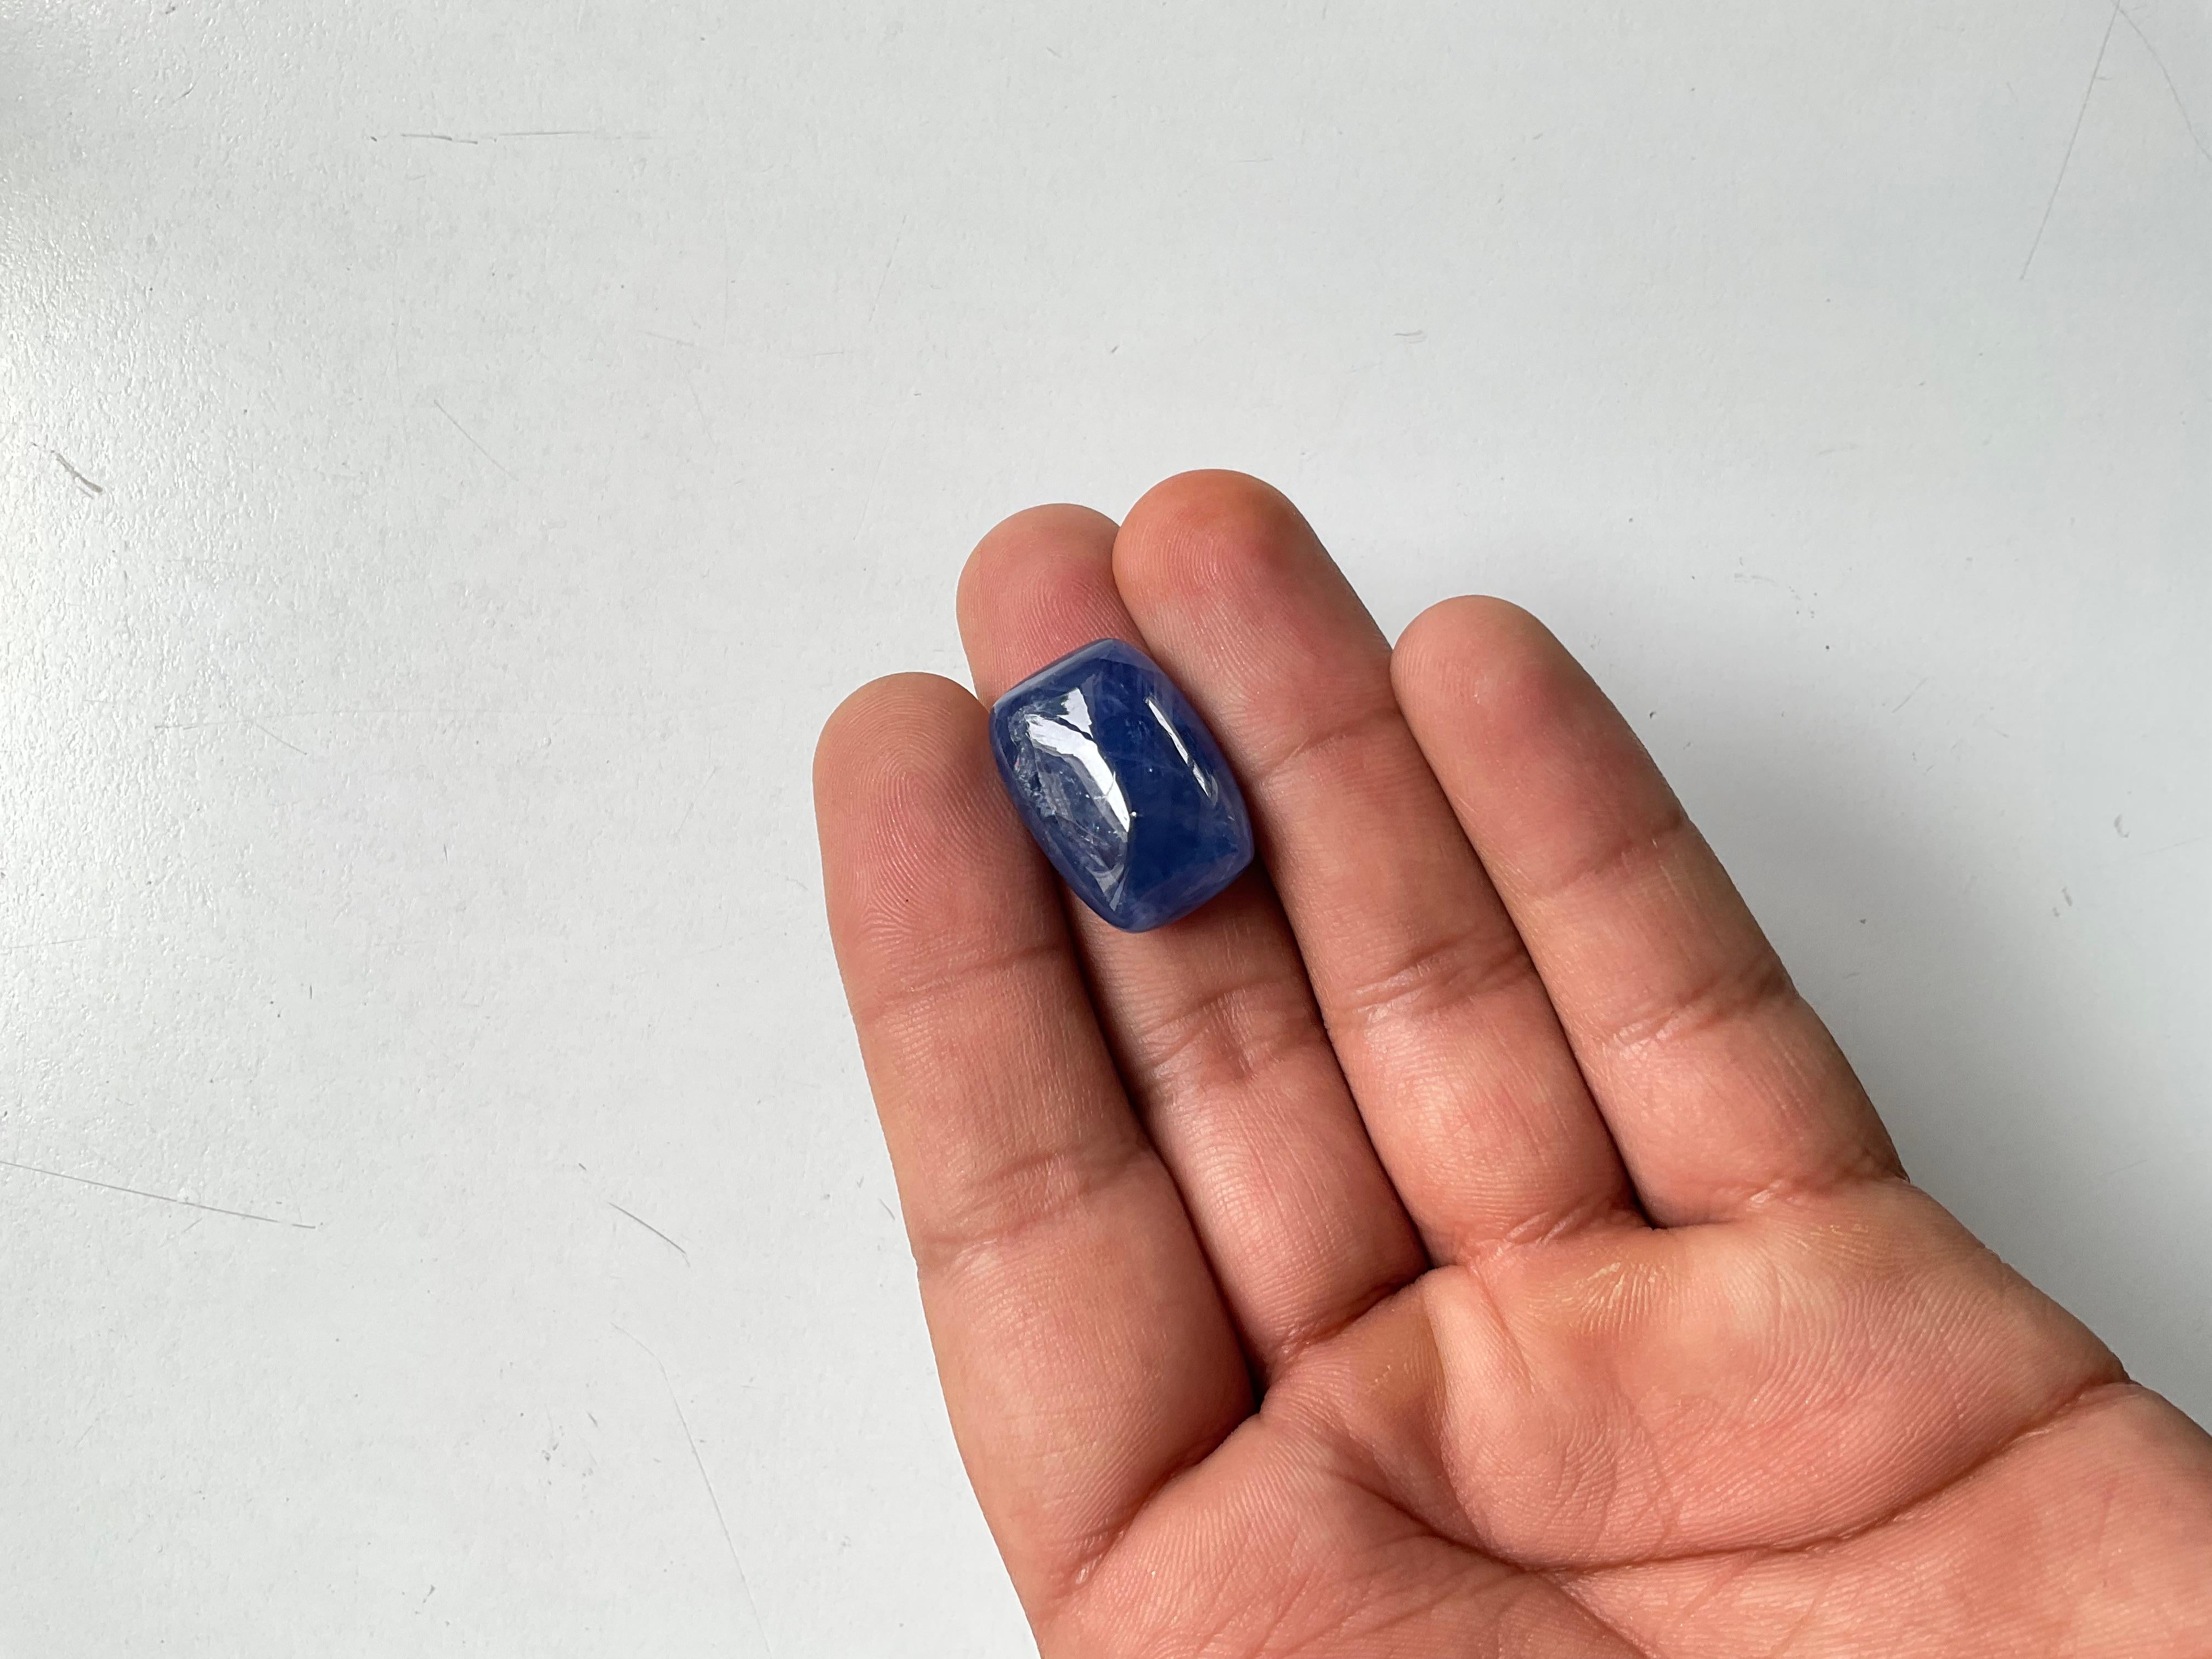 41.73 Carats Burmese Sapphire Cabochon Sugarloaf No-Heat Top Quality Natural Gem For Sale 2